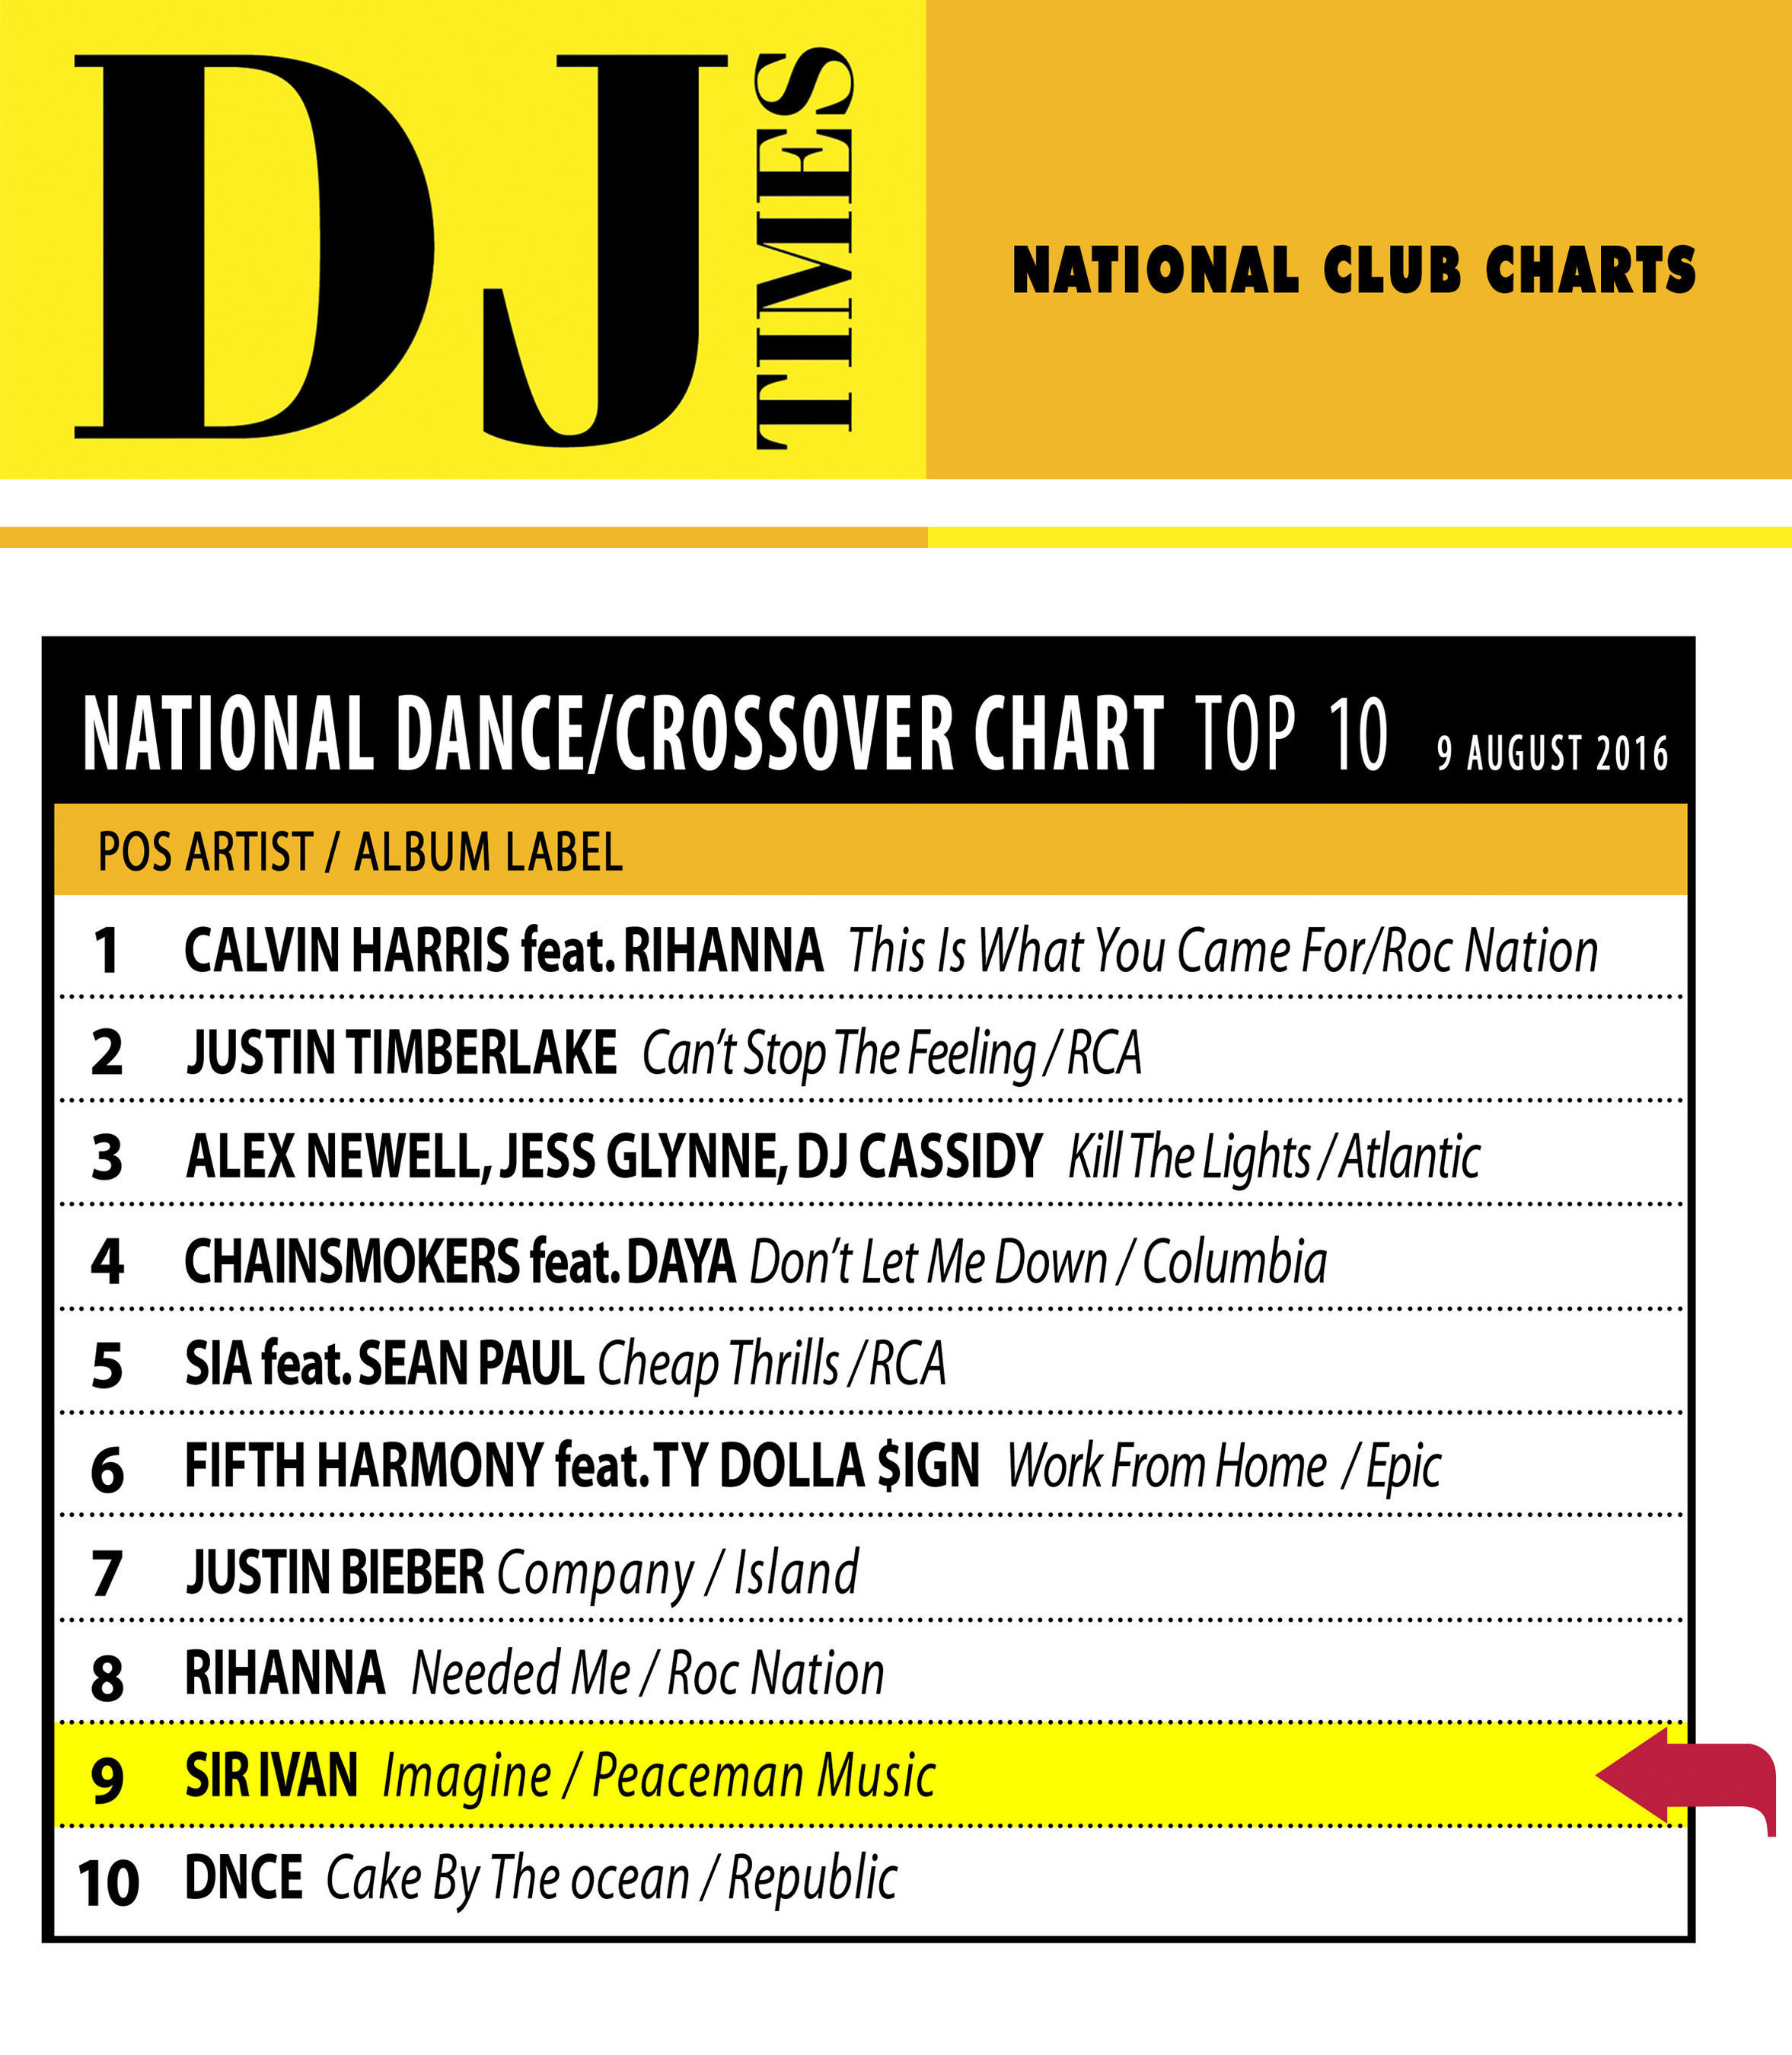 SIR IVAN's "Imagine" #9 on DJ Times National Dance/Crossover Top 40 Chart